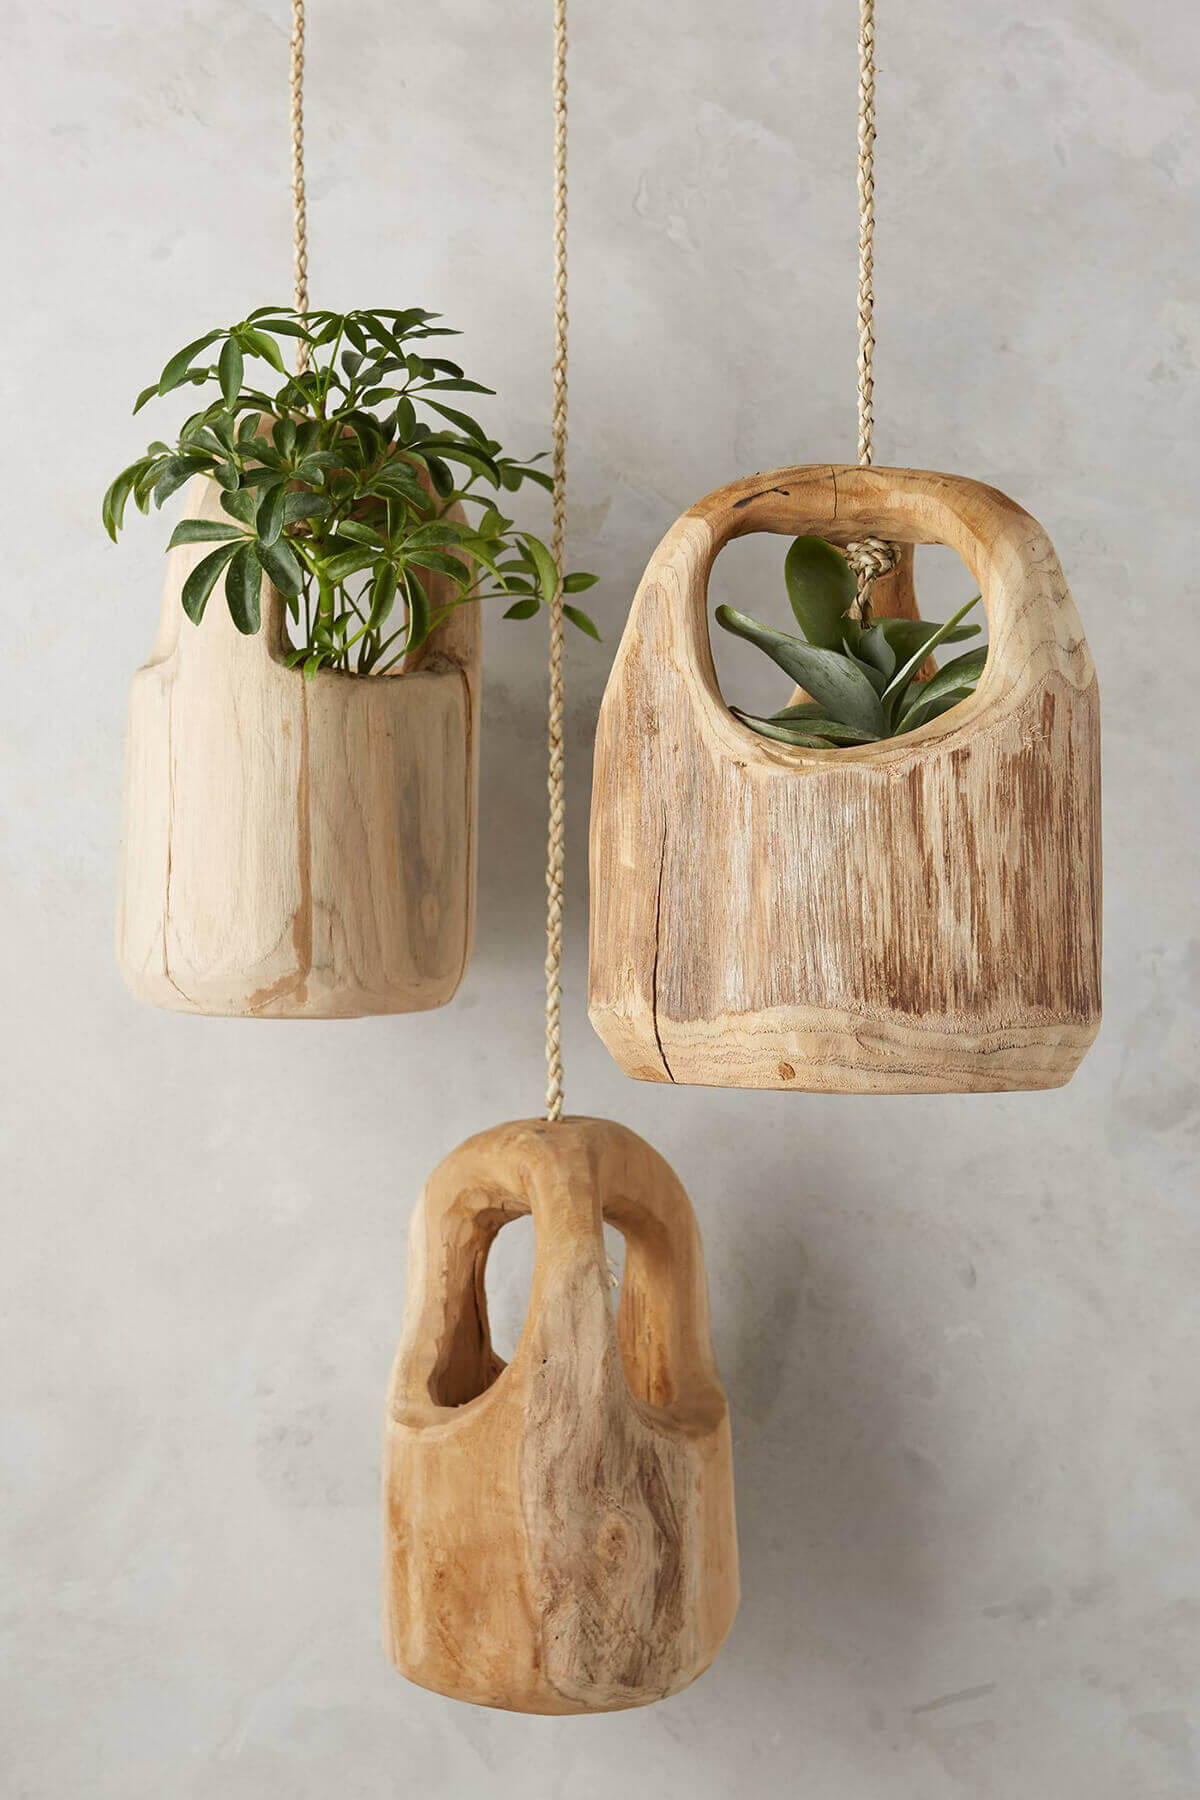 Rustic Carved Wooden Hanging Planters | DIY Outdoor Hanging Planter Ideas | Plant Pot Design Ideas